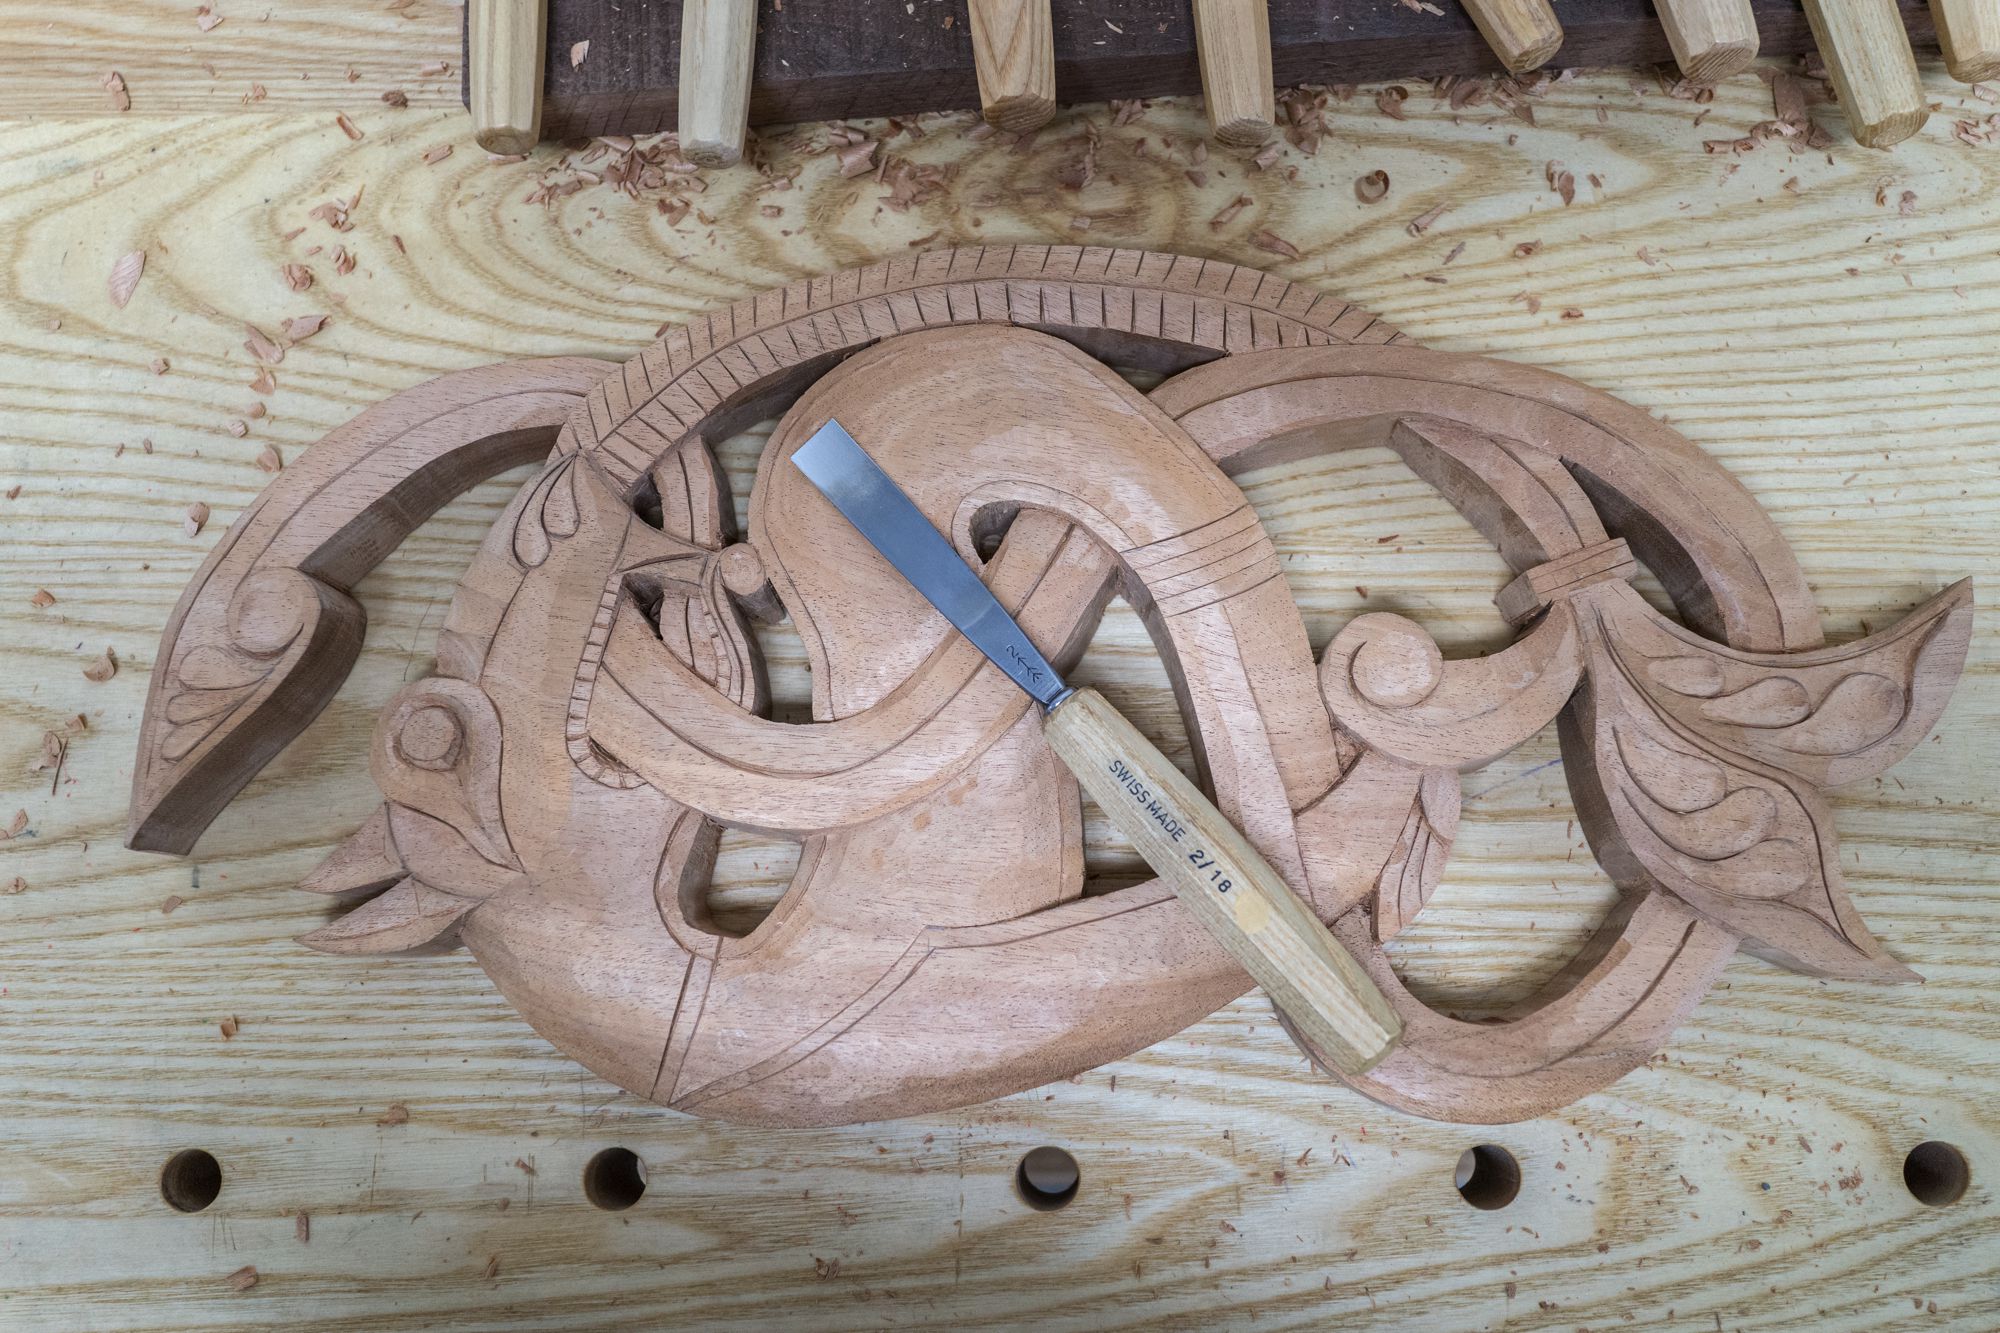 Viking Carving with Jay Haavik, April 2019